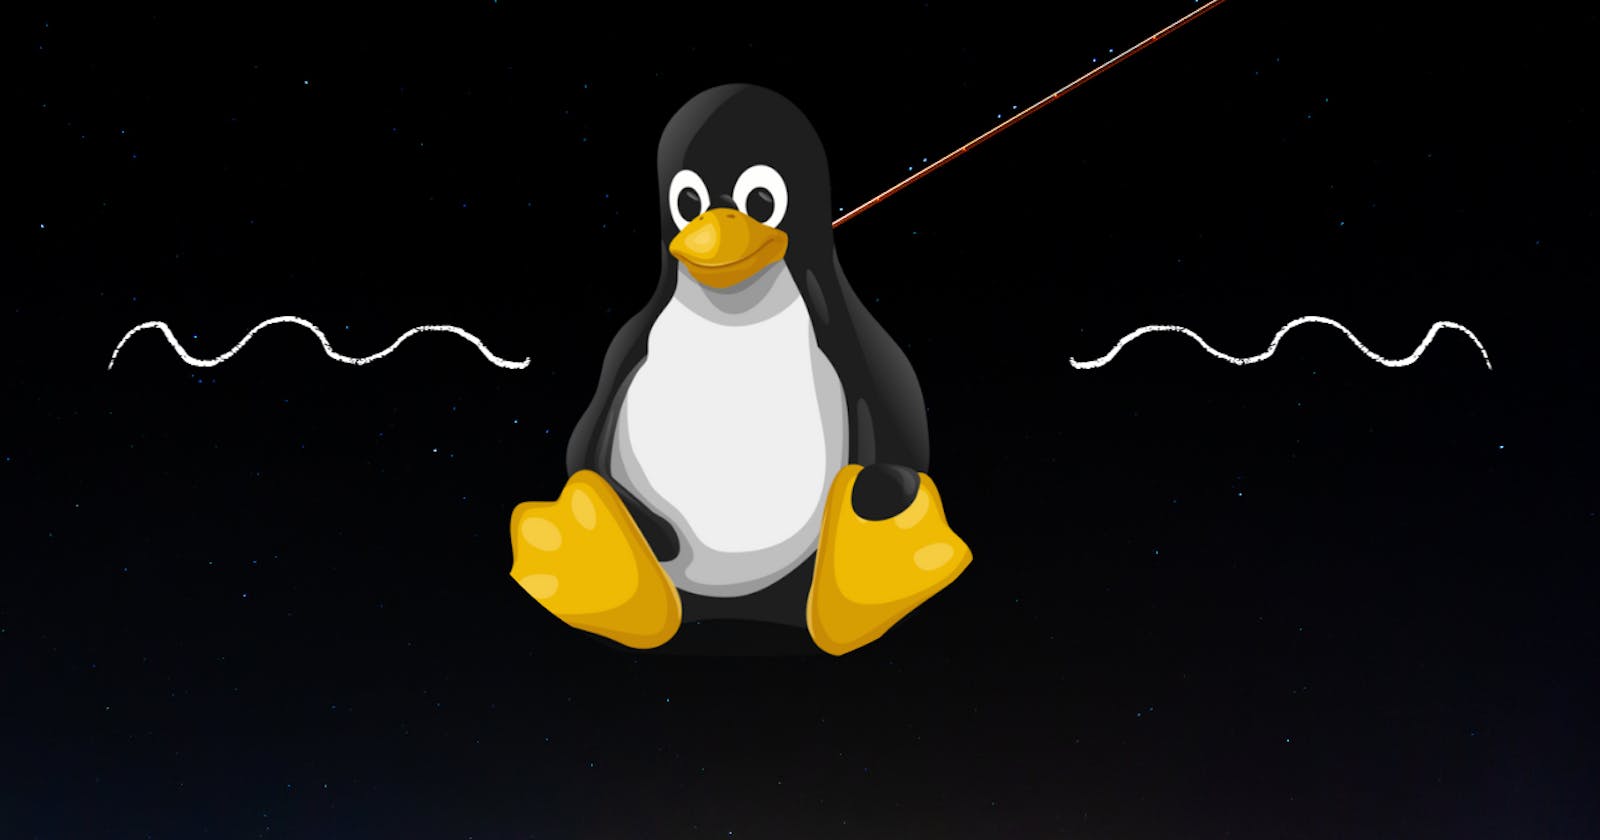 How to learn Linux?